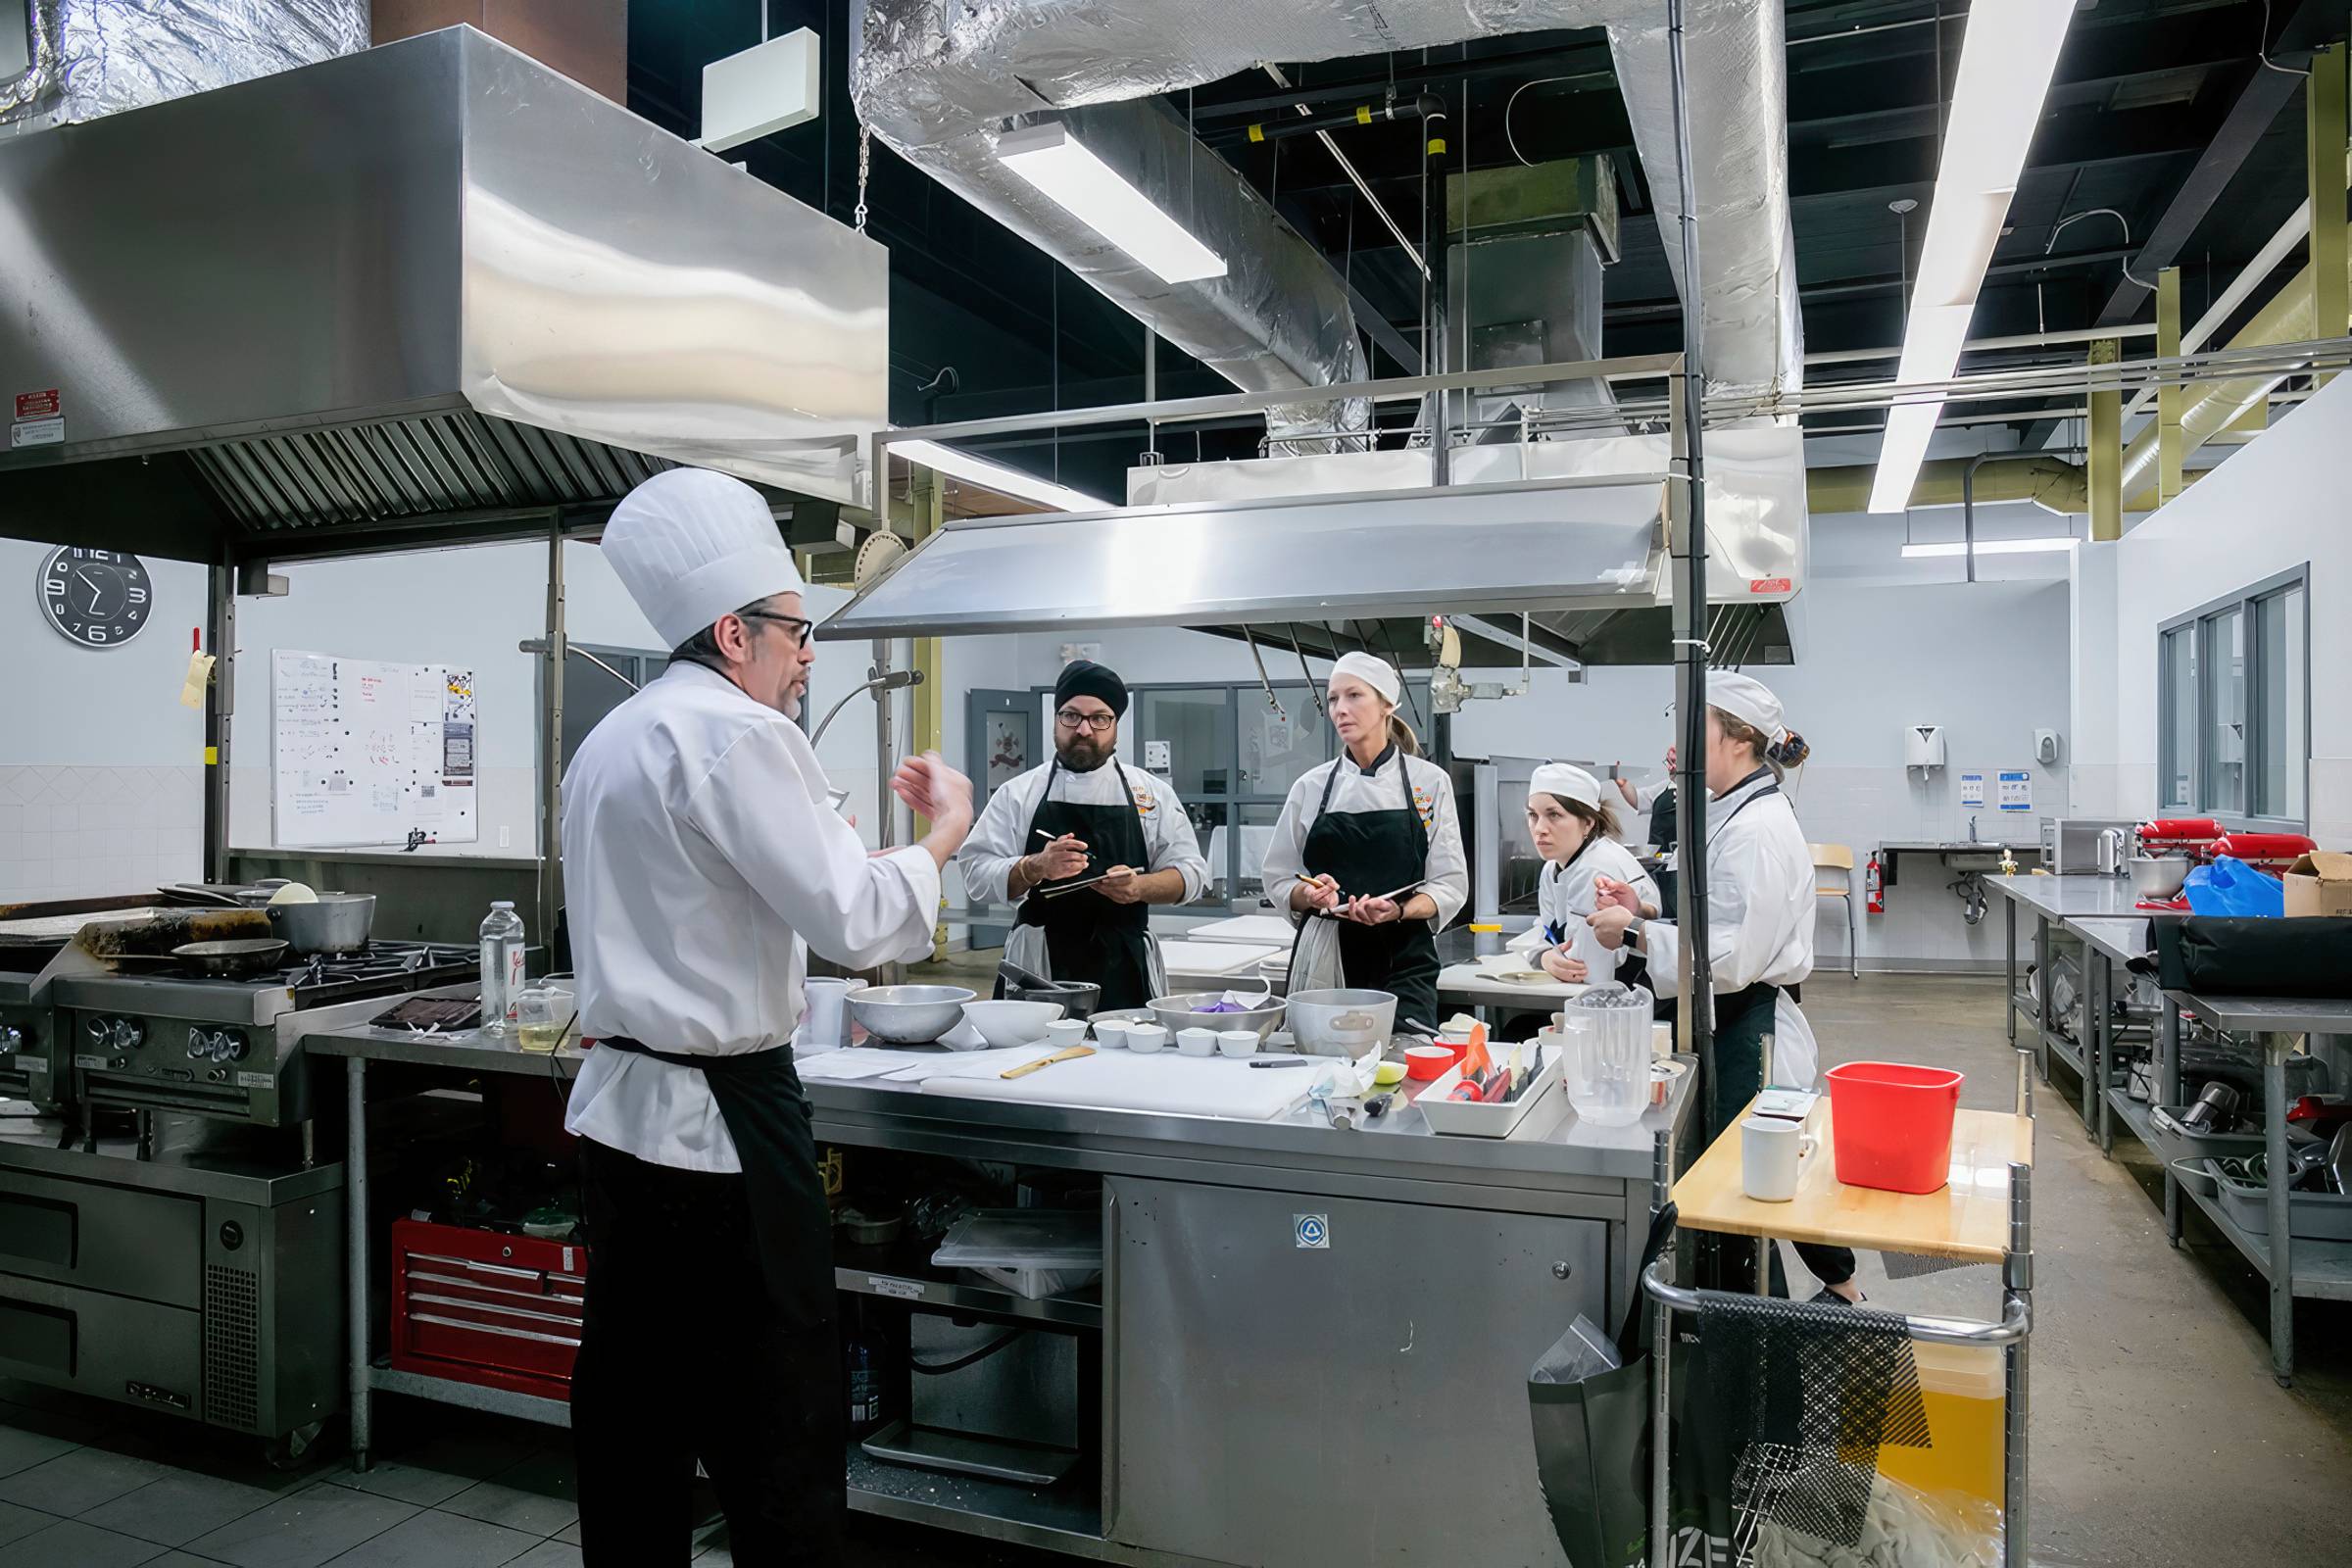 Comparing Culinary Colleges - Image 17 - Top Toques Institute of Culinary Excellence